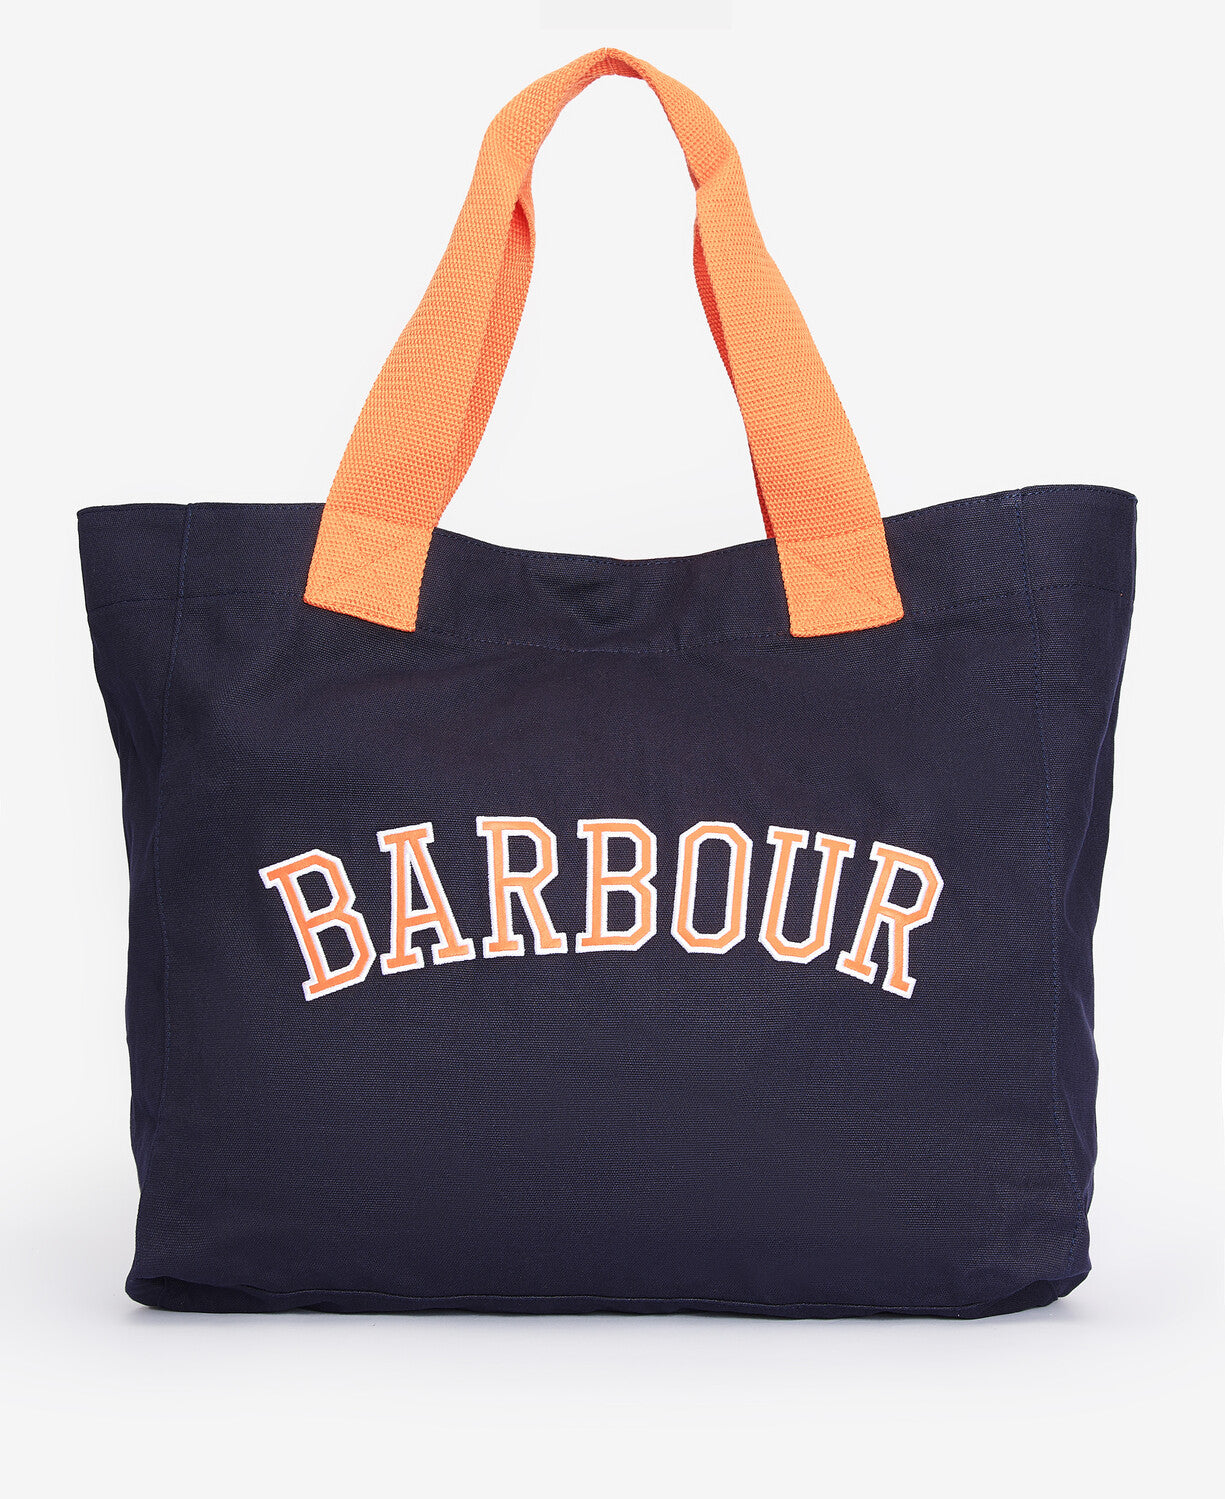 Barbour Logo Holiday Tote Bag